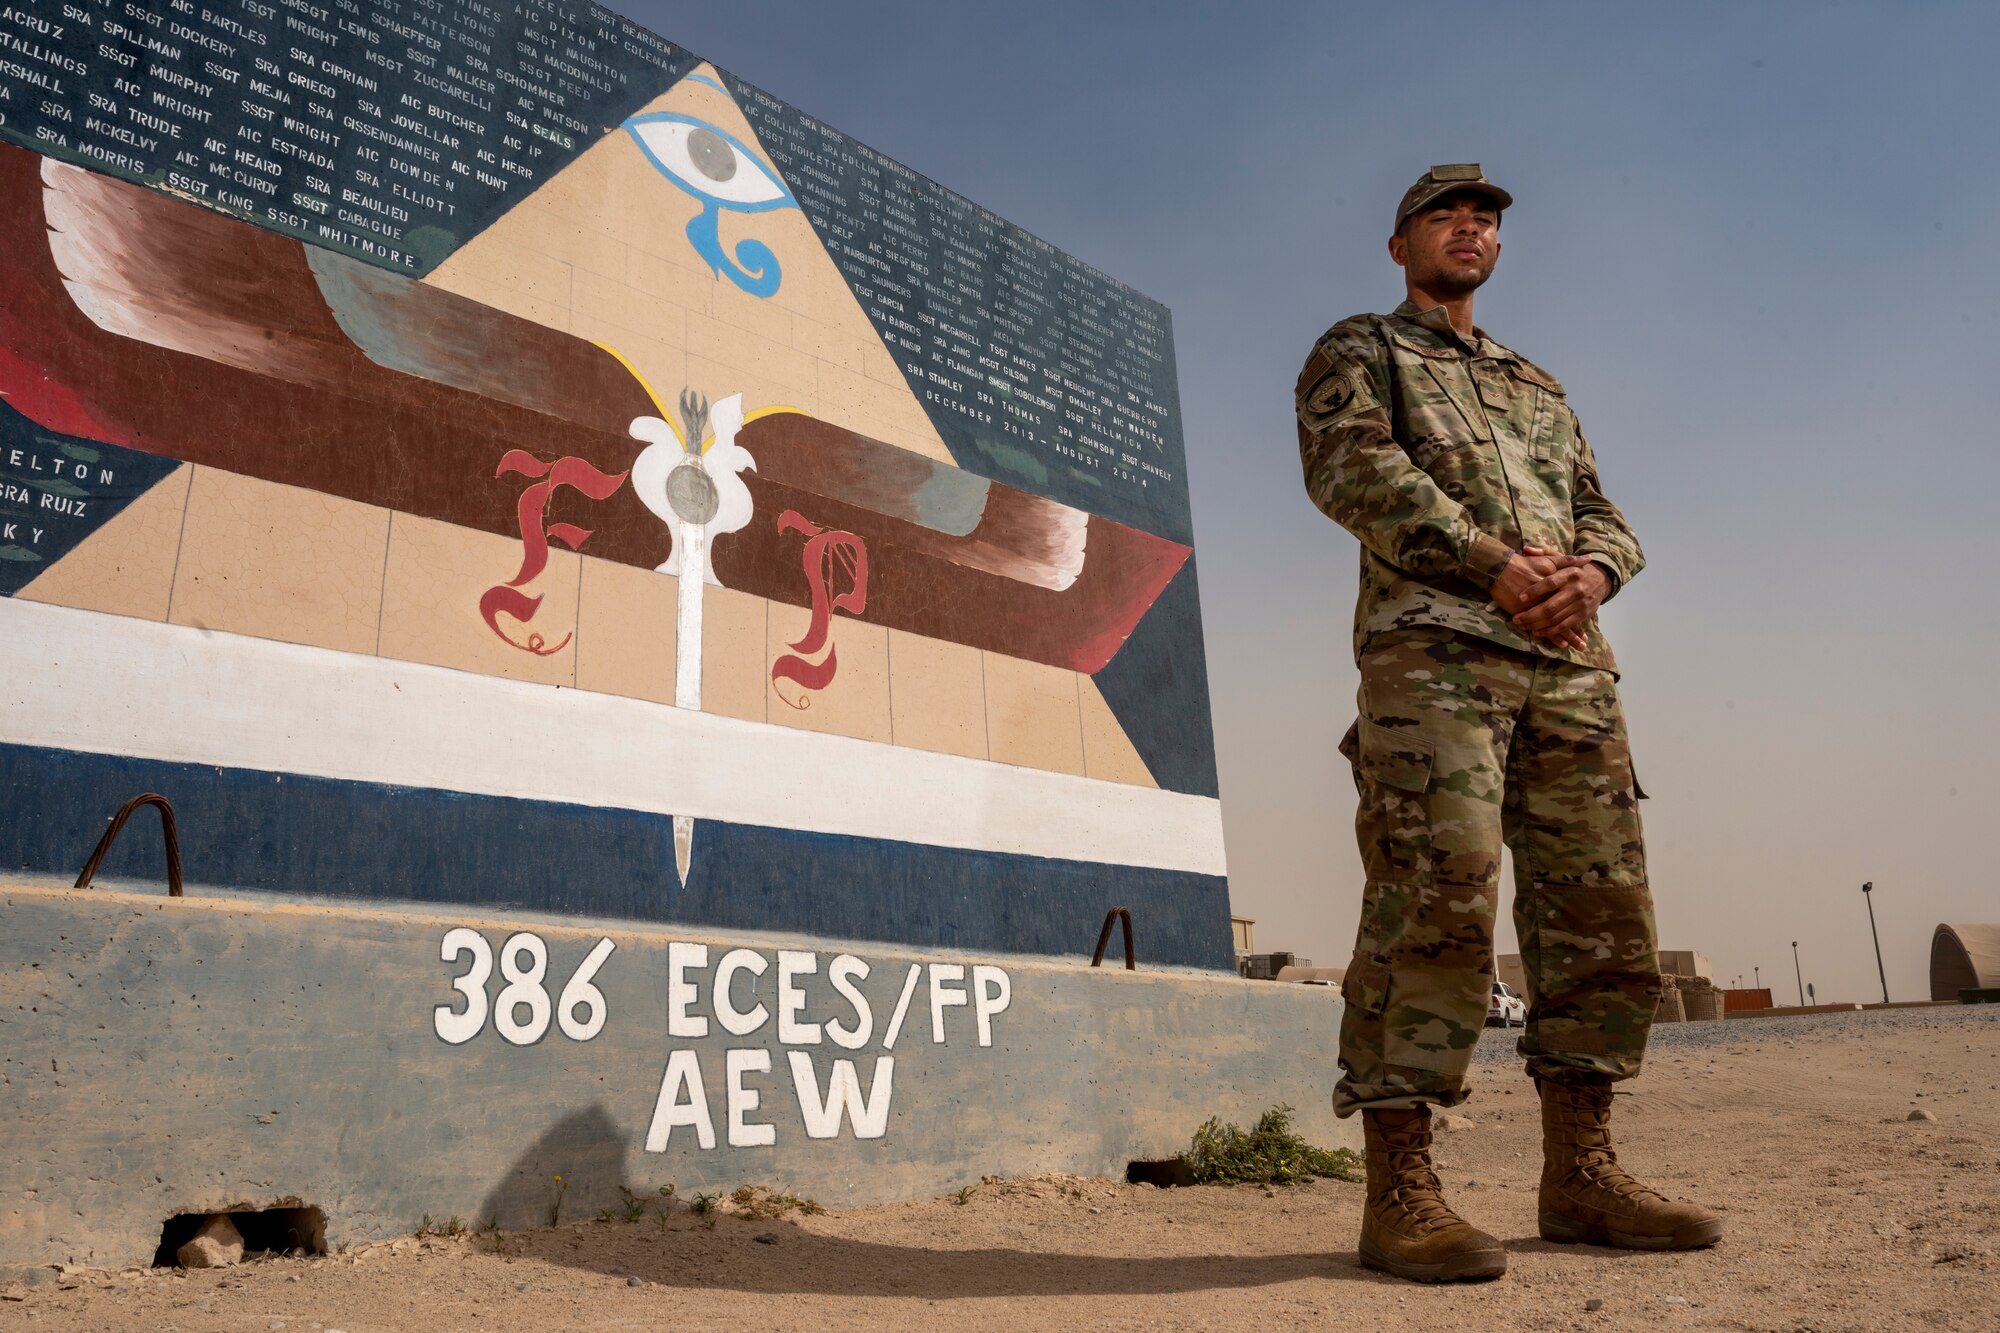 Airman Antwain Hanks, 386th Expeditionary Civil Engineer Squadron force protection, poses for a photo in front of an FP mural at Ali Al Salem Air Base, Kuwait, Feb. 26, 2020. Hanks is originally a photojournalist from the 366th Fighter Wing Public Affairs office at Mountain Home Air Force Base, Idaho. (U.S. Air Force photo by Senior Airman JaNae Capuno)